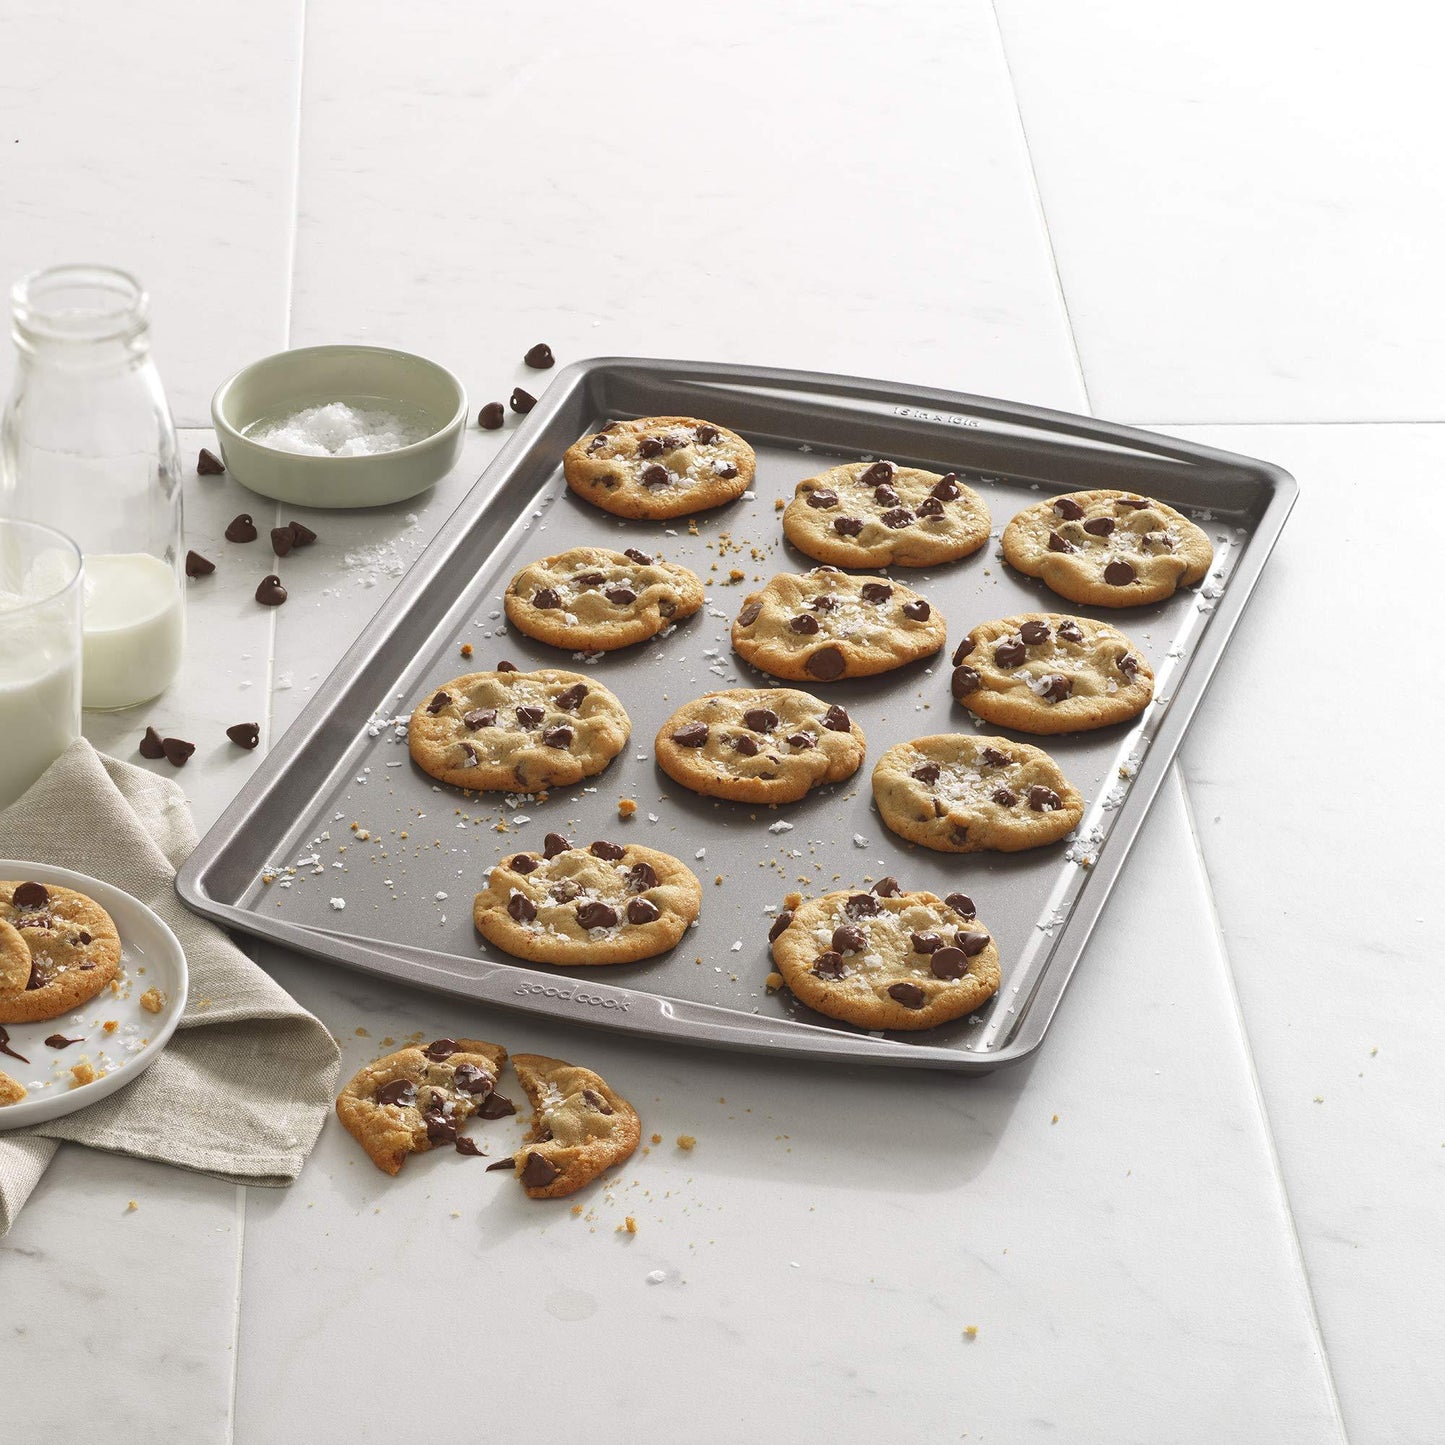 Good Cook Cookie Baking Sheet, 15 x 10 Inch, Gray - CookCave